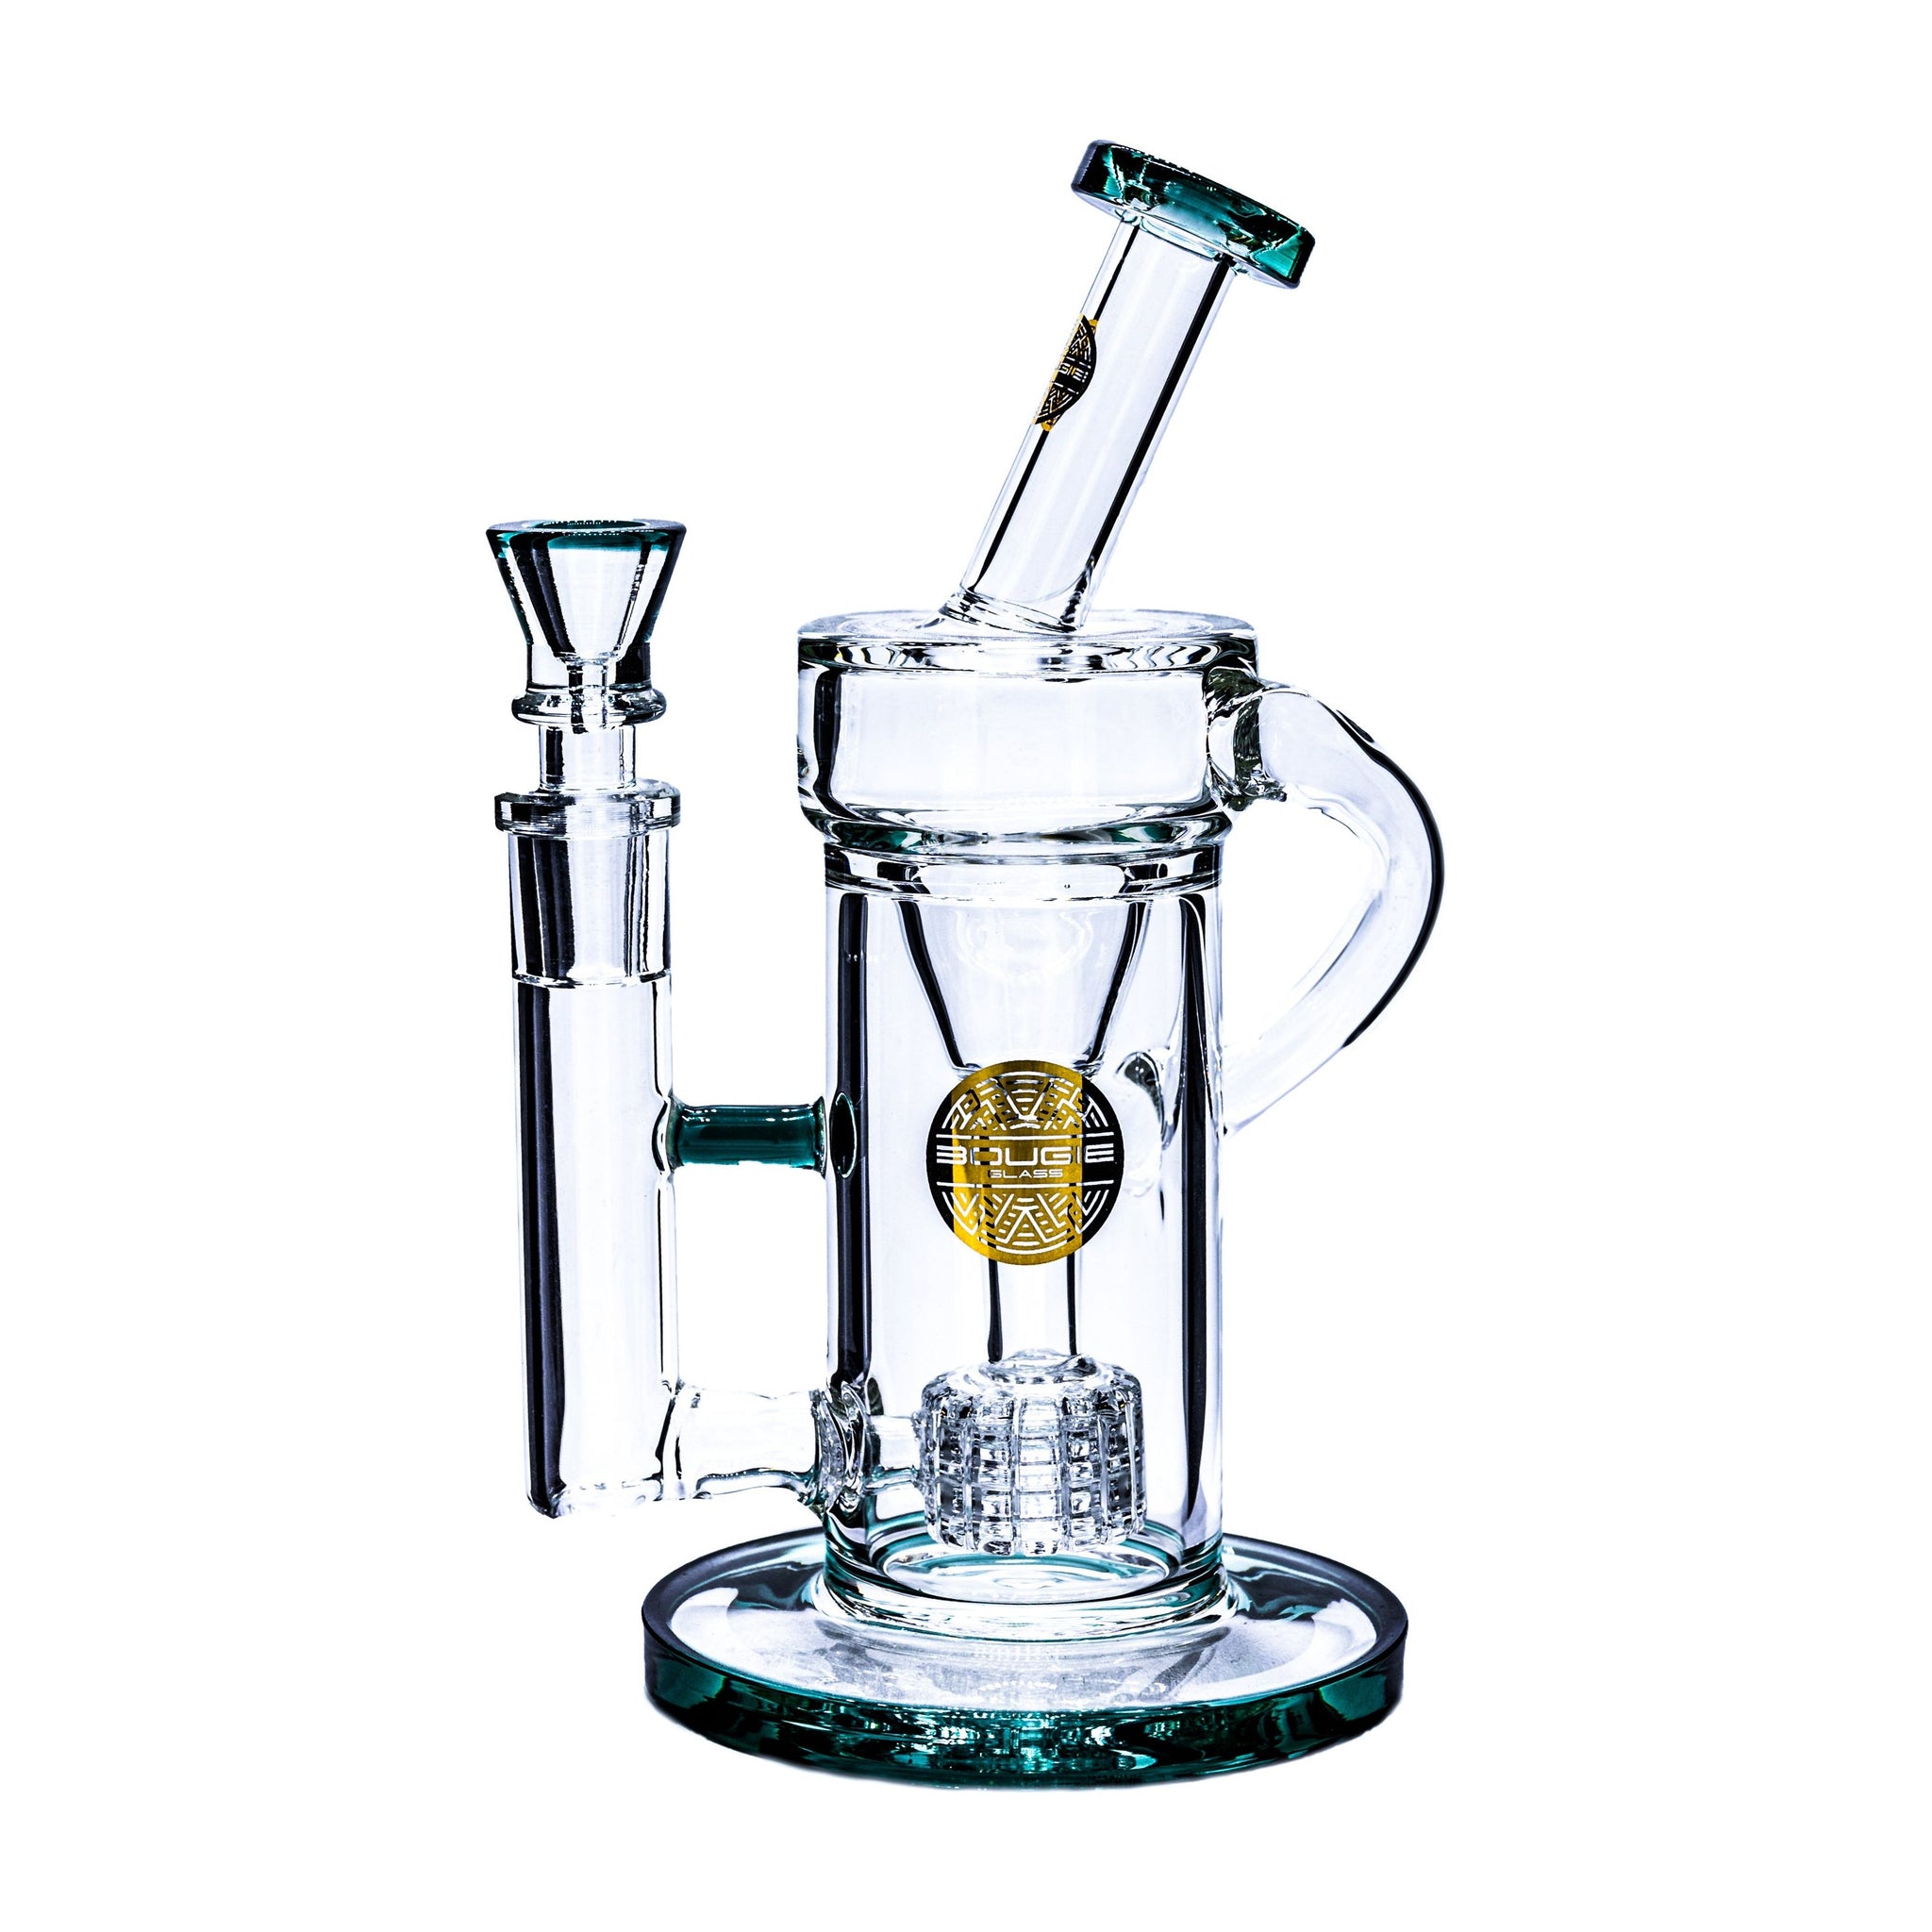 Bougie Recycler #15-05